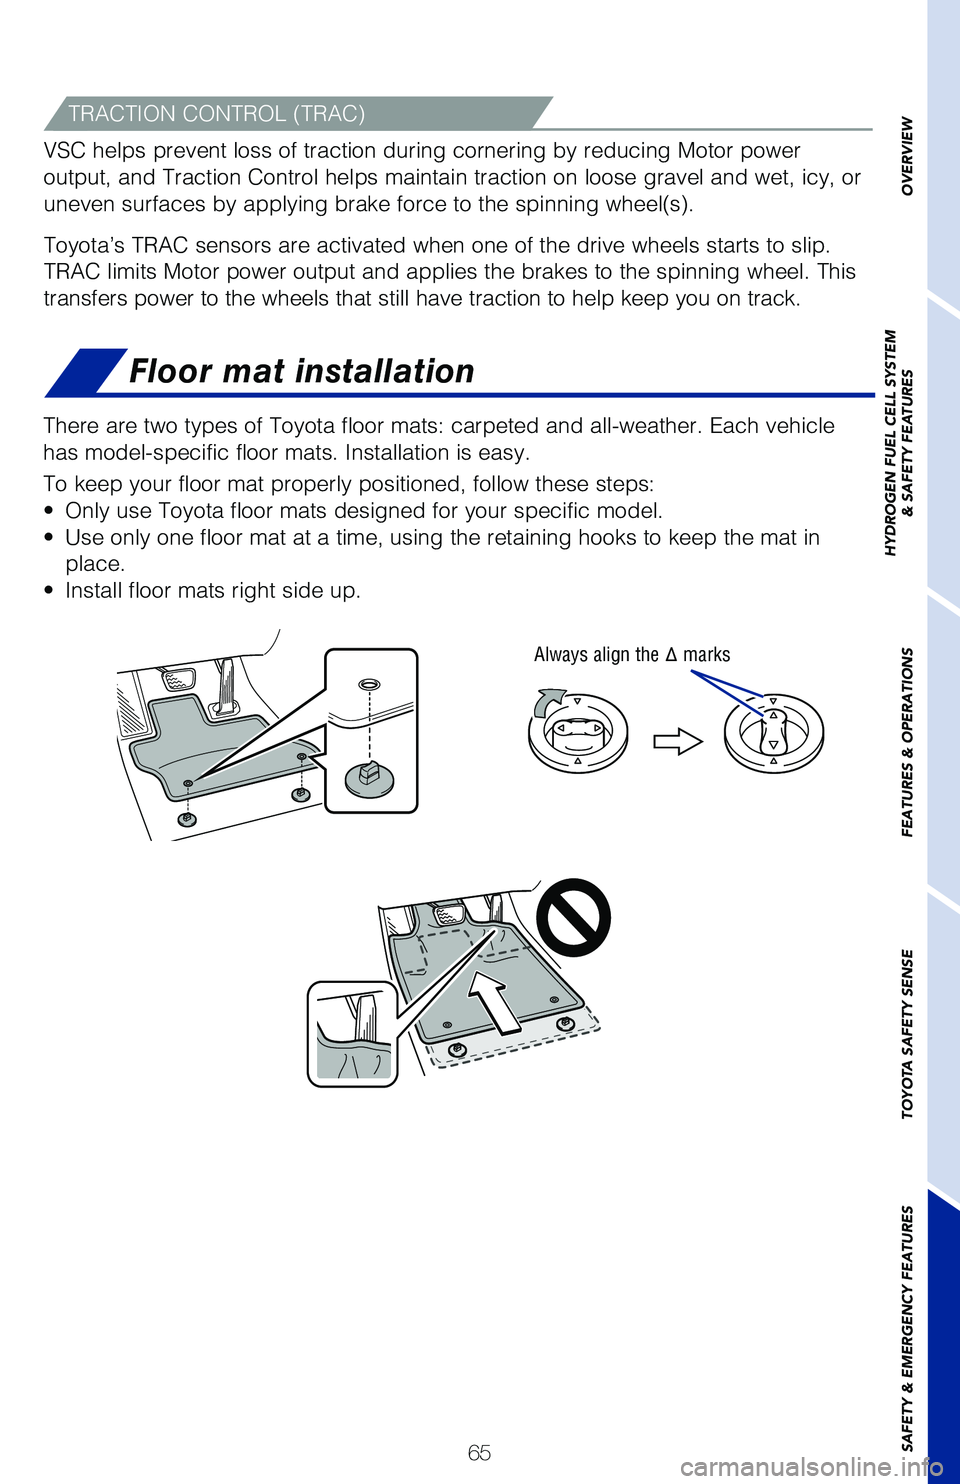 TOYOTA MIRAI 2021   (in English) Owners Guide 65
OVERVIEW
HYDROGEN FUEL CELL SYSTEM
& SAFETY FEATURES
FEATURES & OPERATIONS
TOYOTA SAFETY SENSE
SAFETY & EMERGENCY FEATURES
Floor mat installation
There are two types of Toyota floor mats: carpeted 